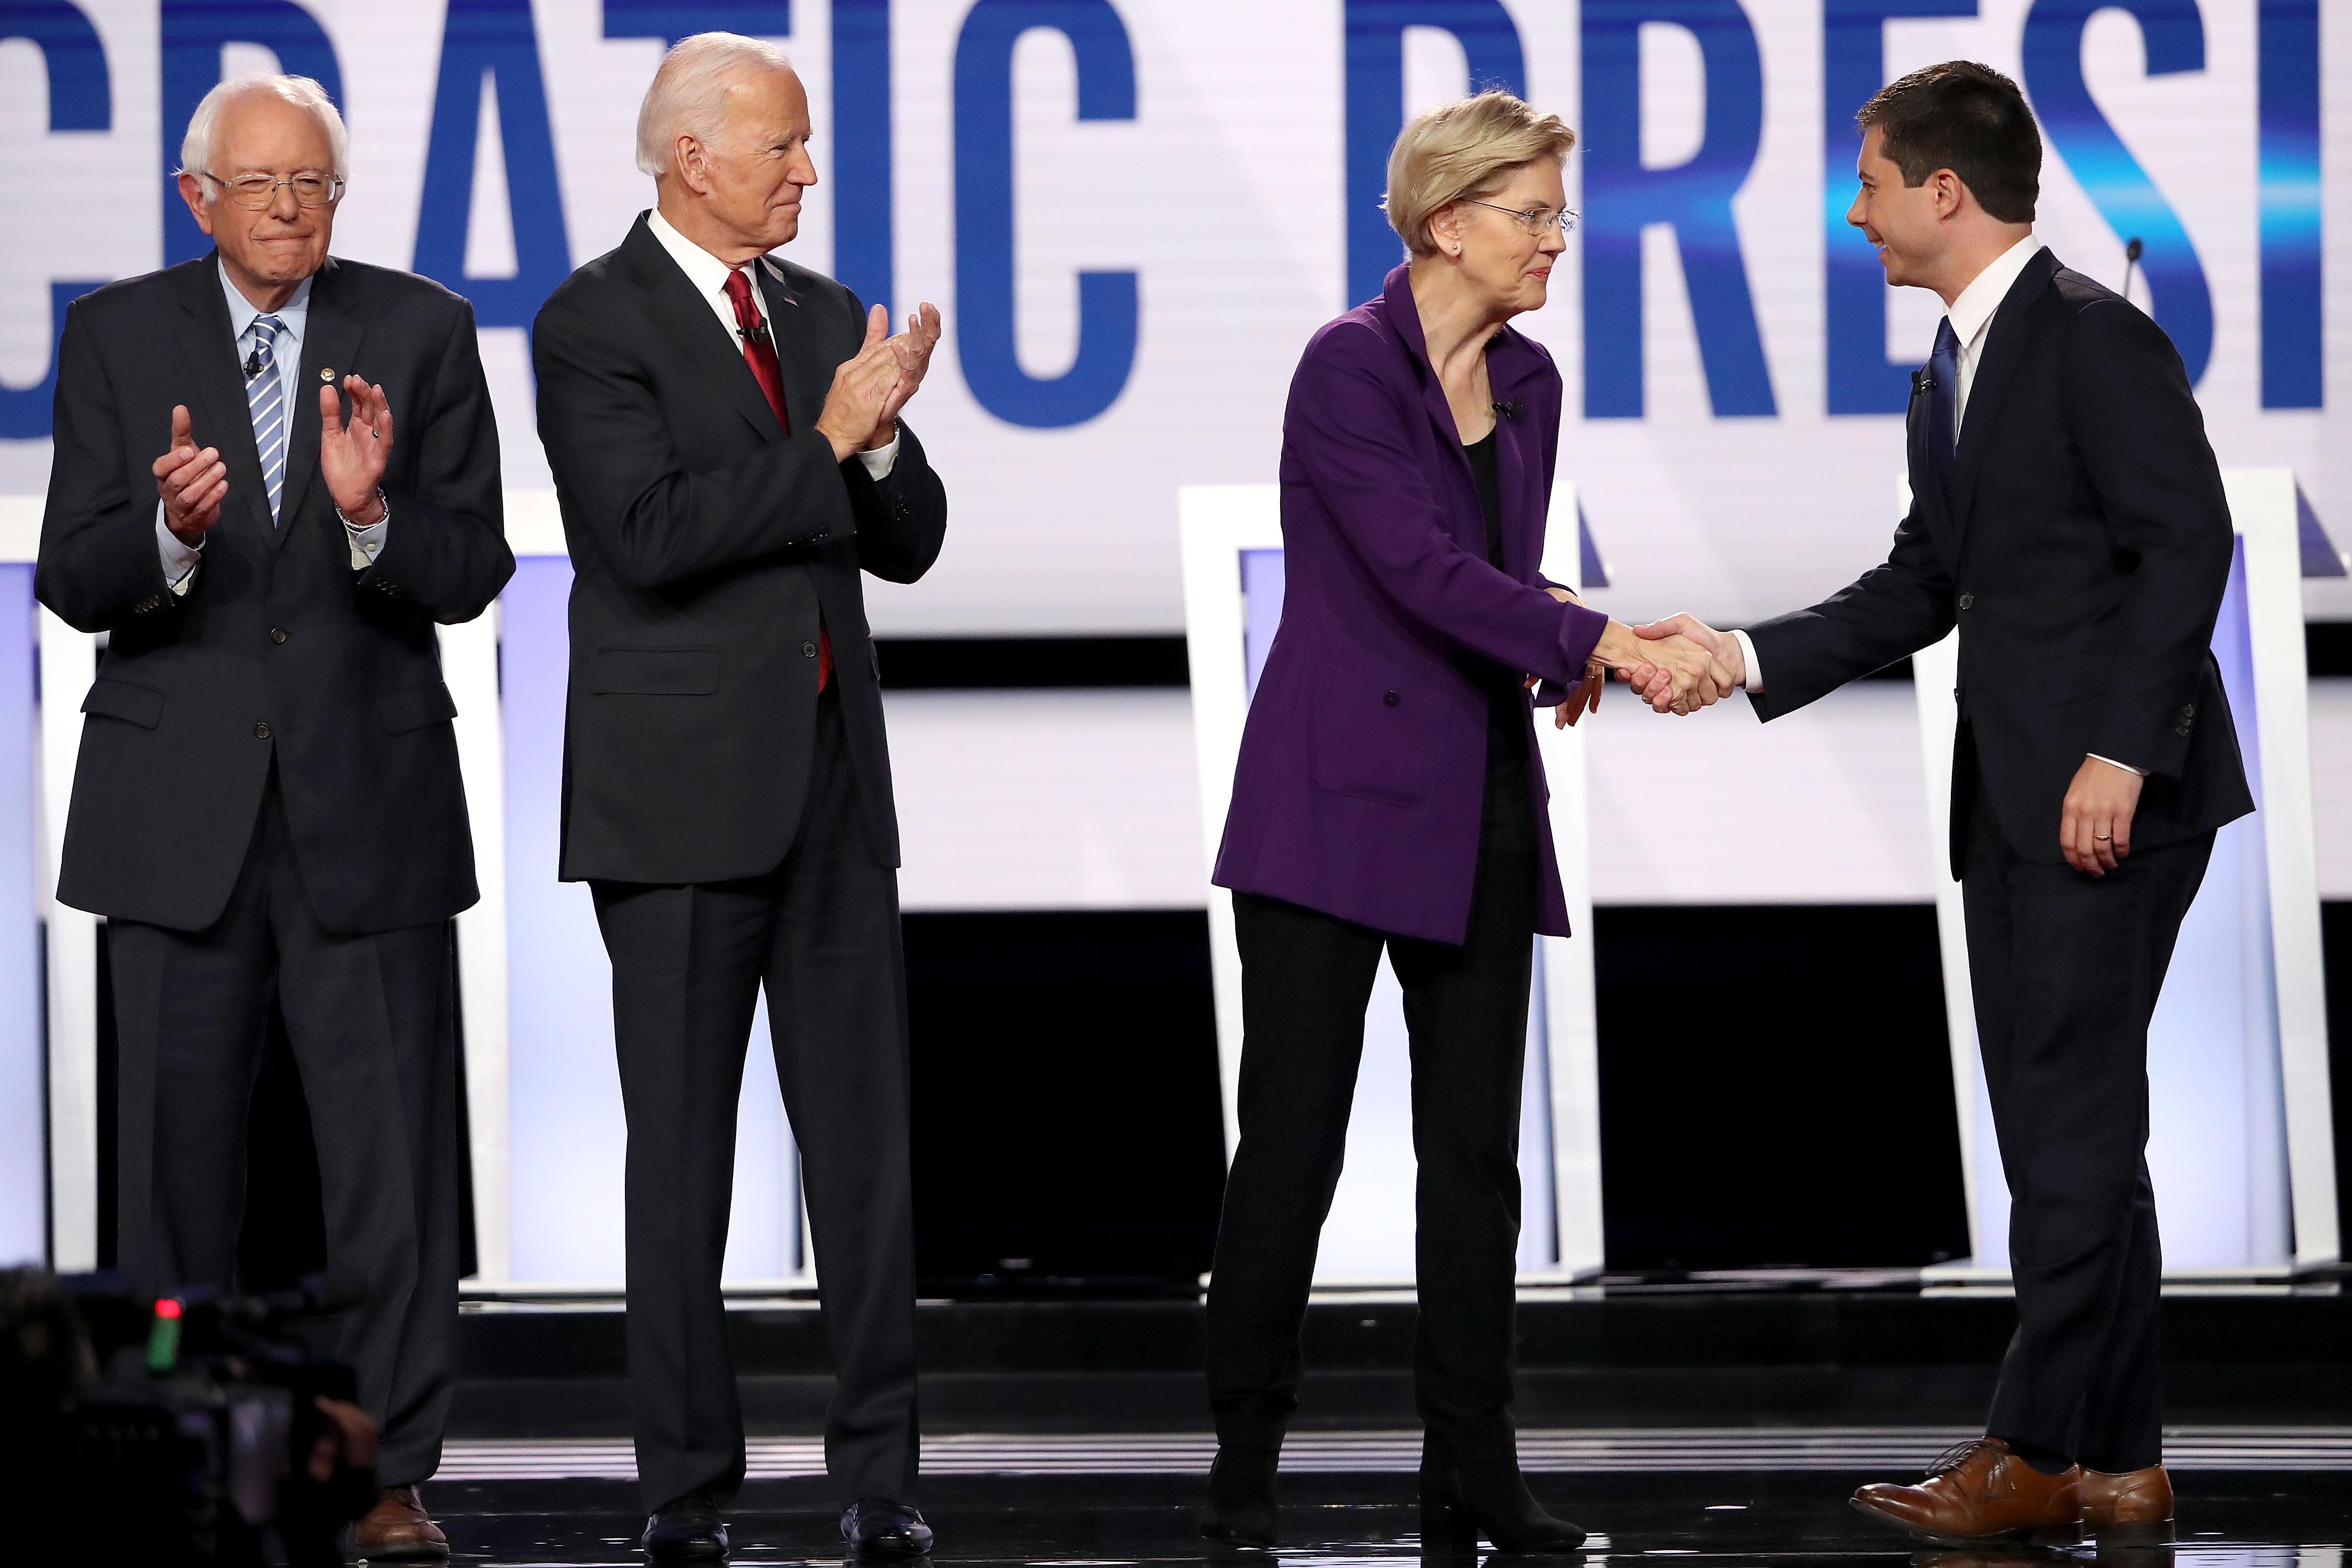 Democratic presidential candidates shake hands on stage before a presidential debate on Oct. 15, 2019 in Westerville, Ohio.